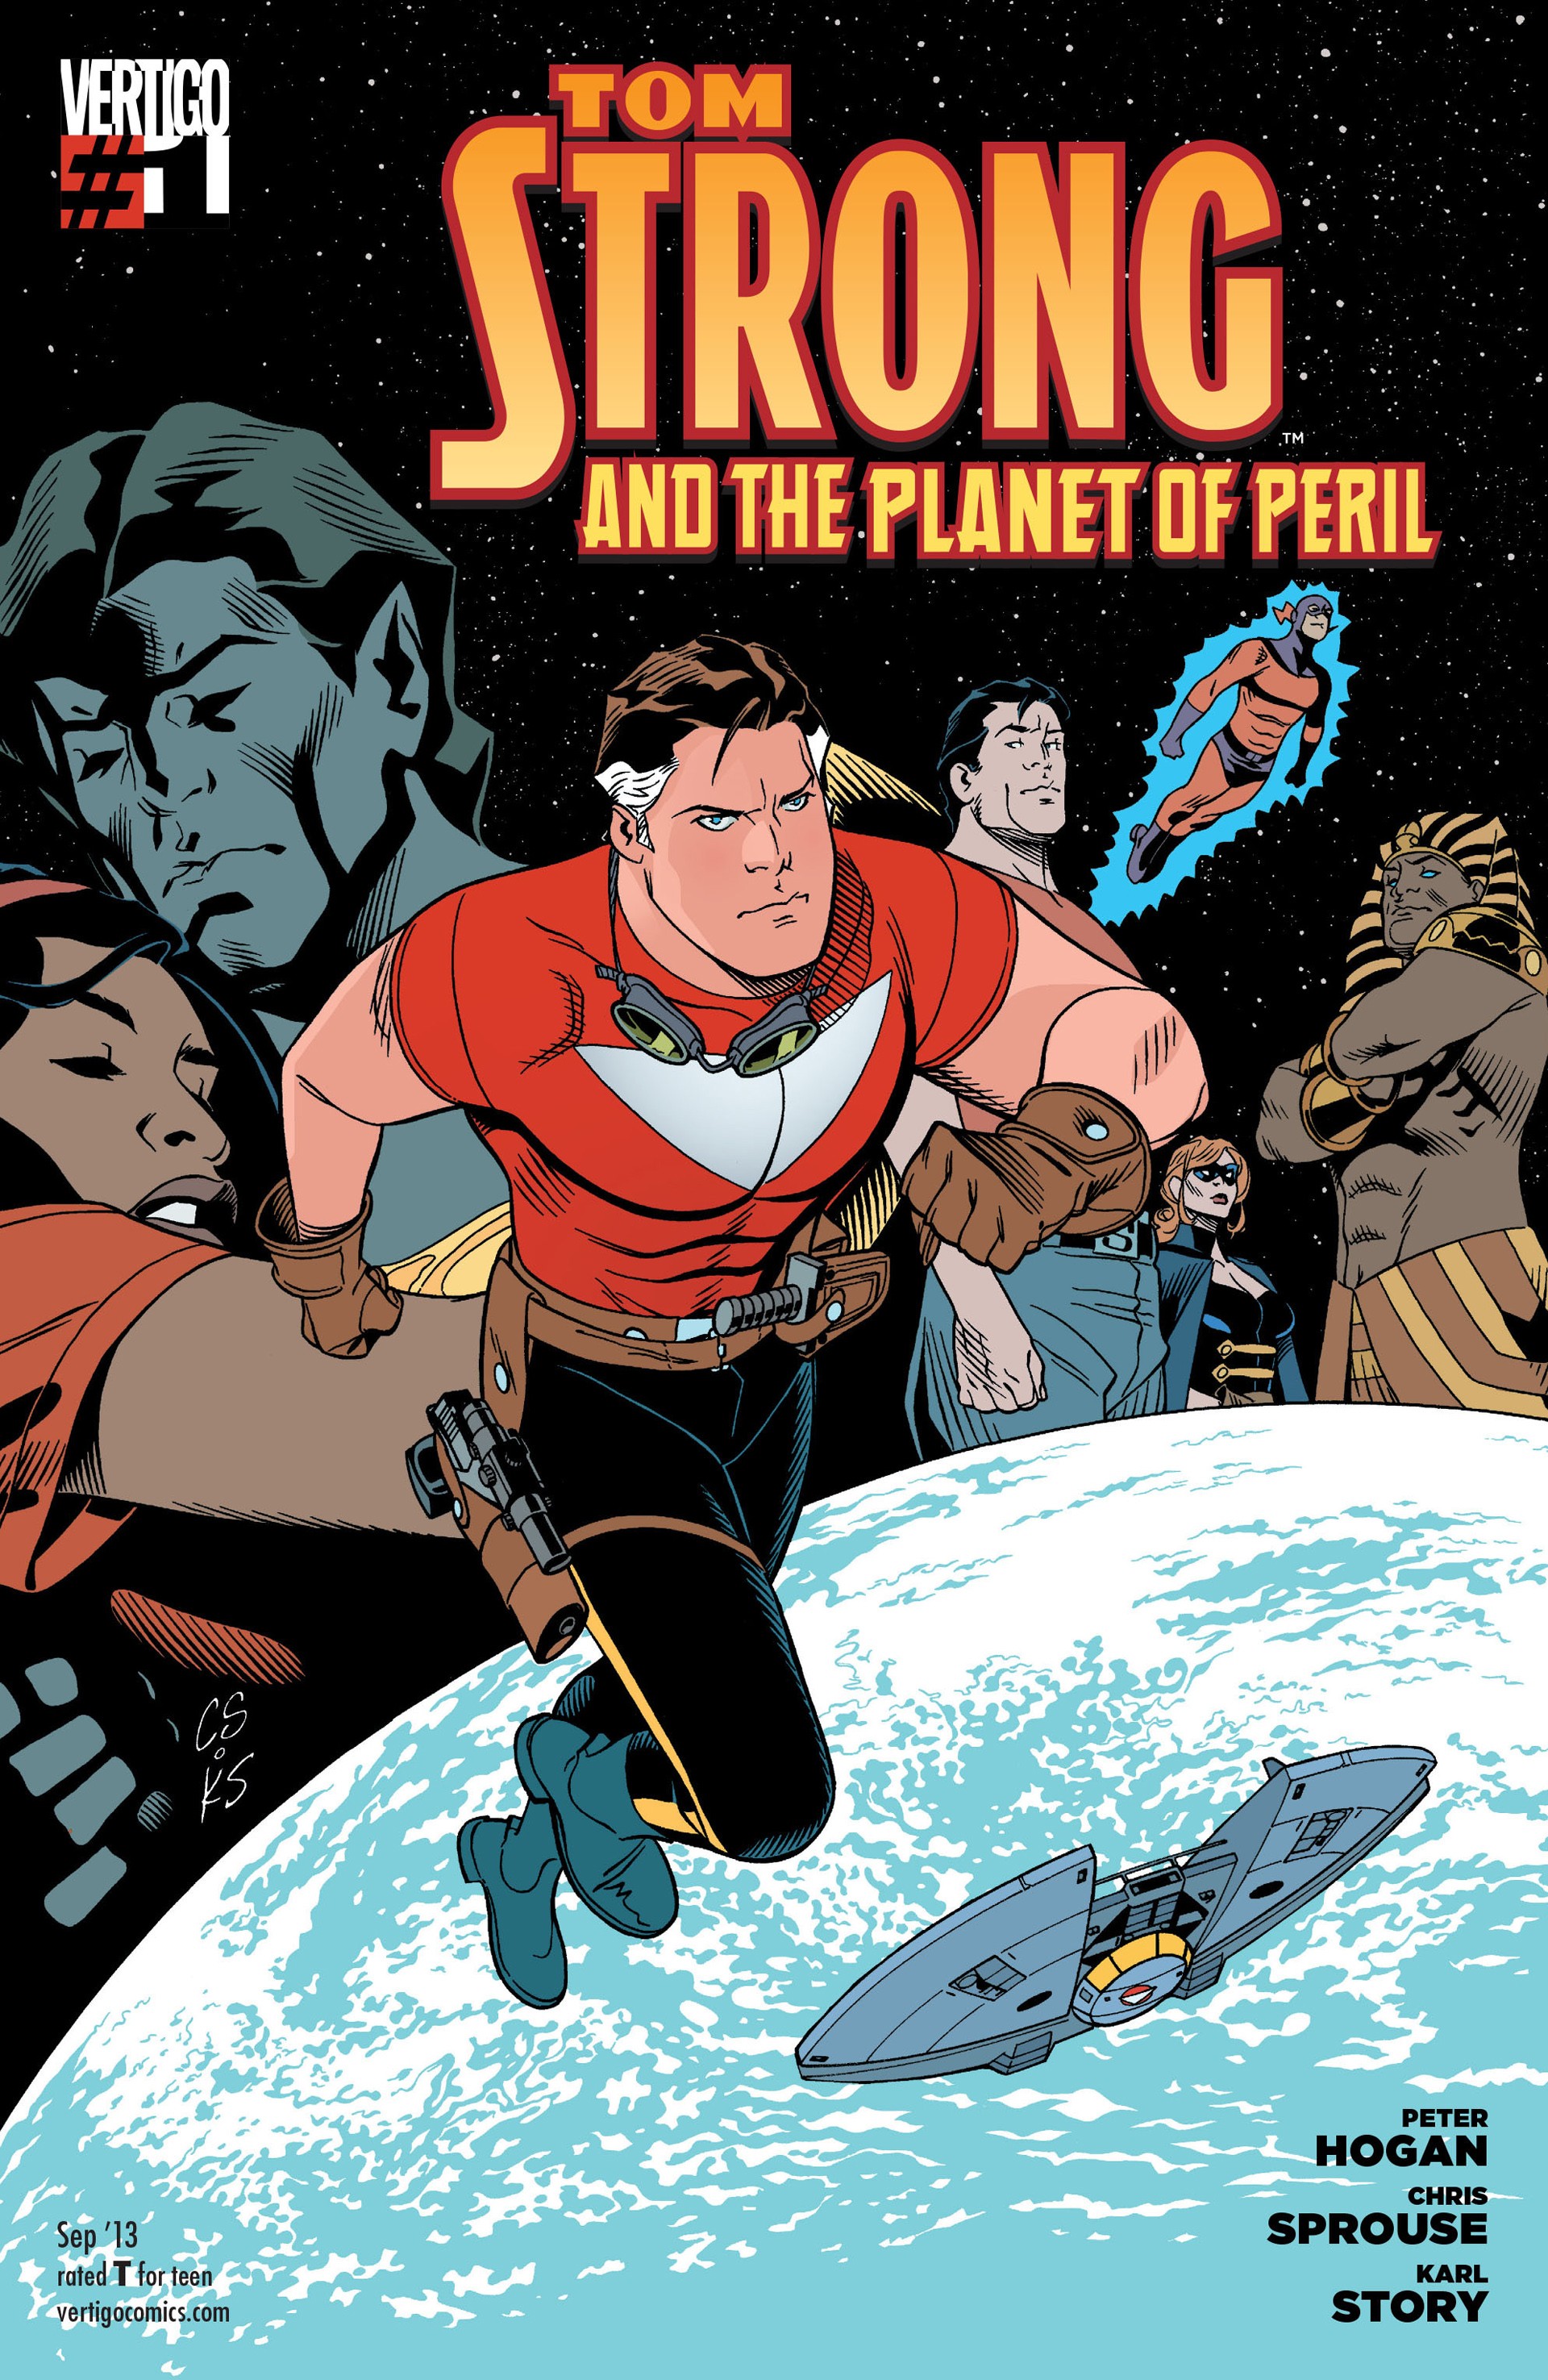 Tom Strong and the Planet of Peril Vol. 1 #1